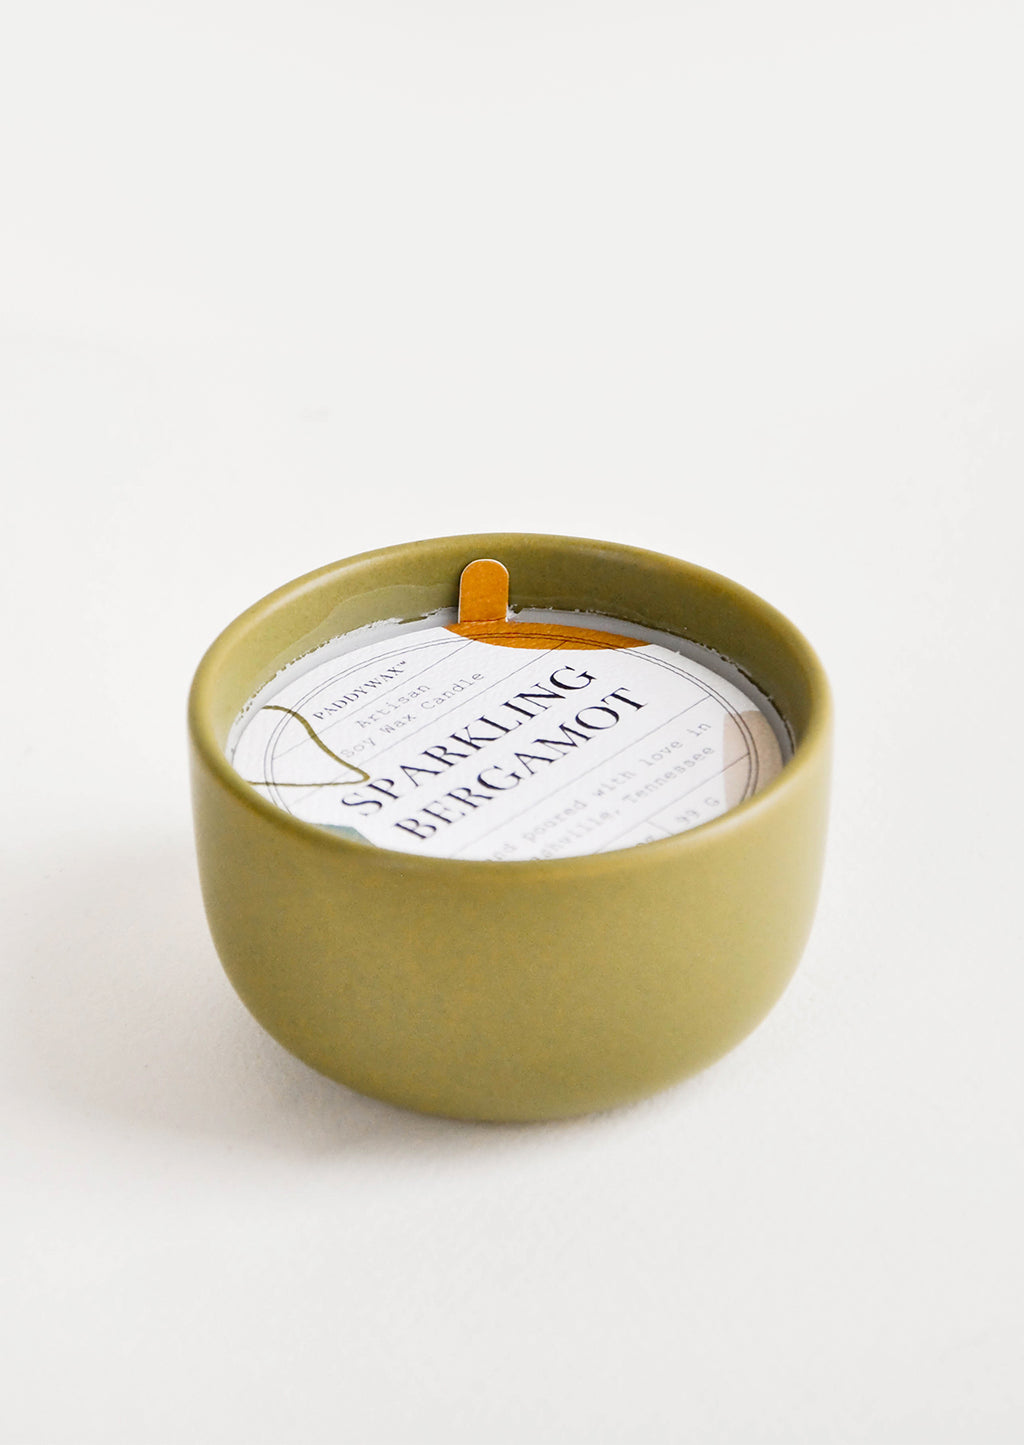 Sparkling Bergamot: Small scented candle in colorful olive green ceramic vessel